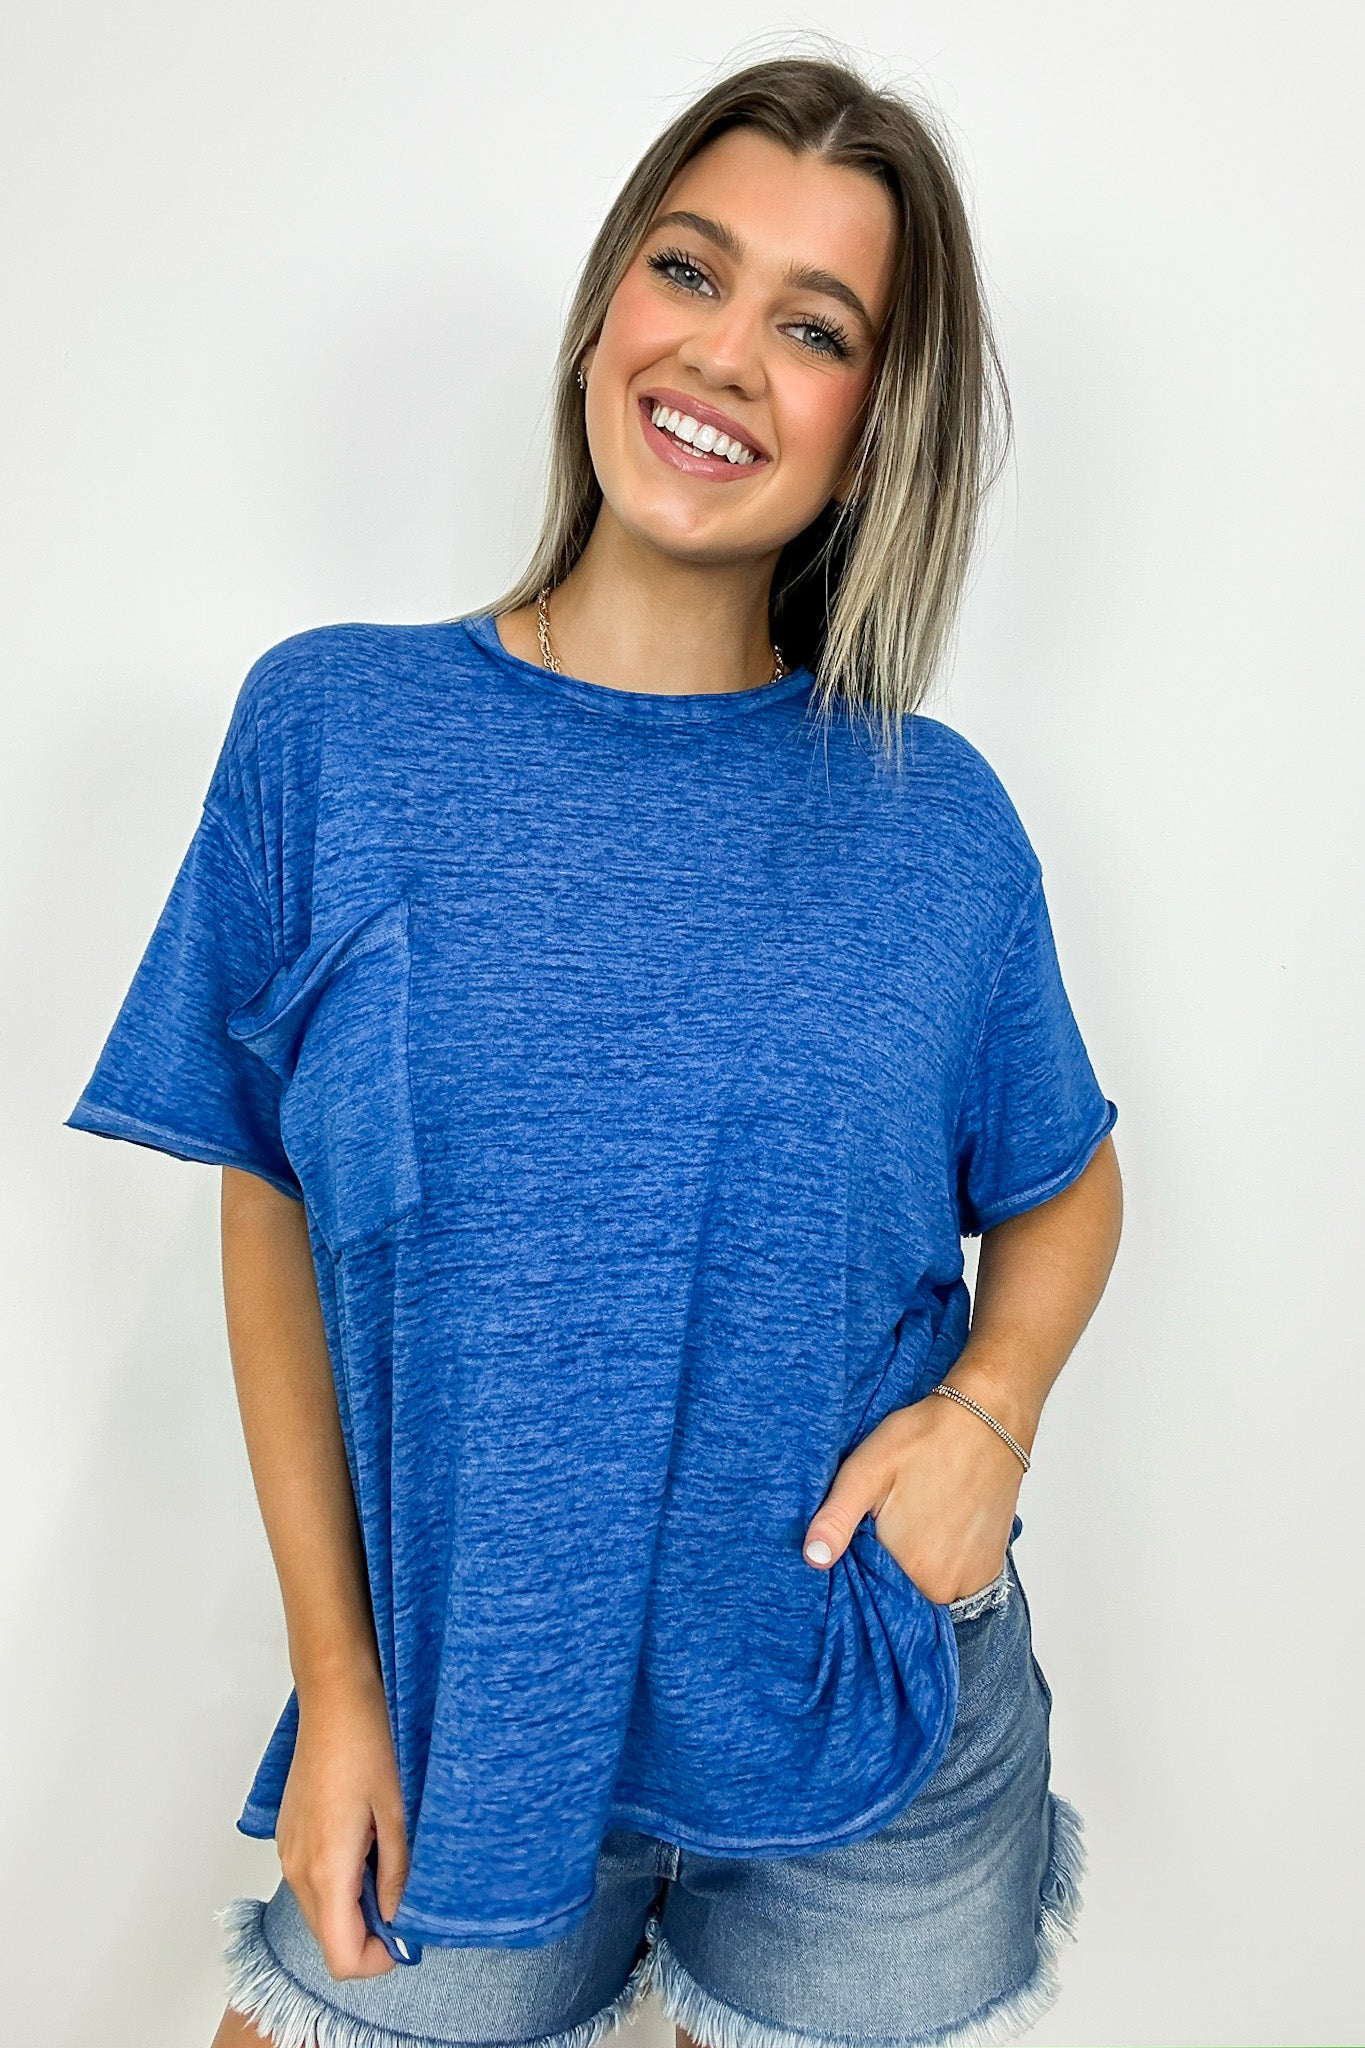 Classic Blue / SM Marisol Burnout Wash Oversized Pocket Top - BACK IN STOCK - Madison and Mallory